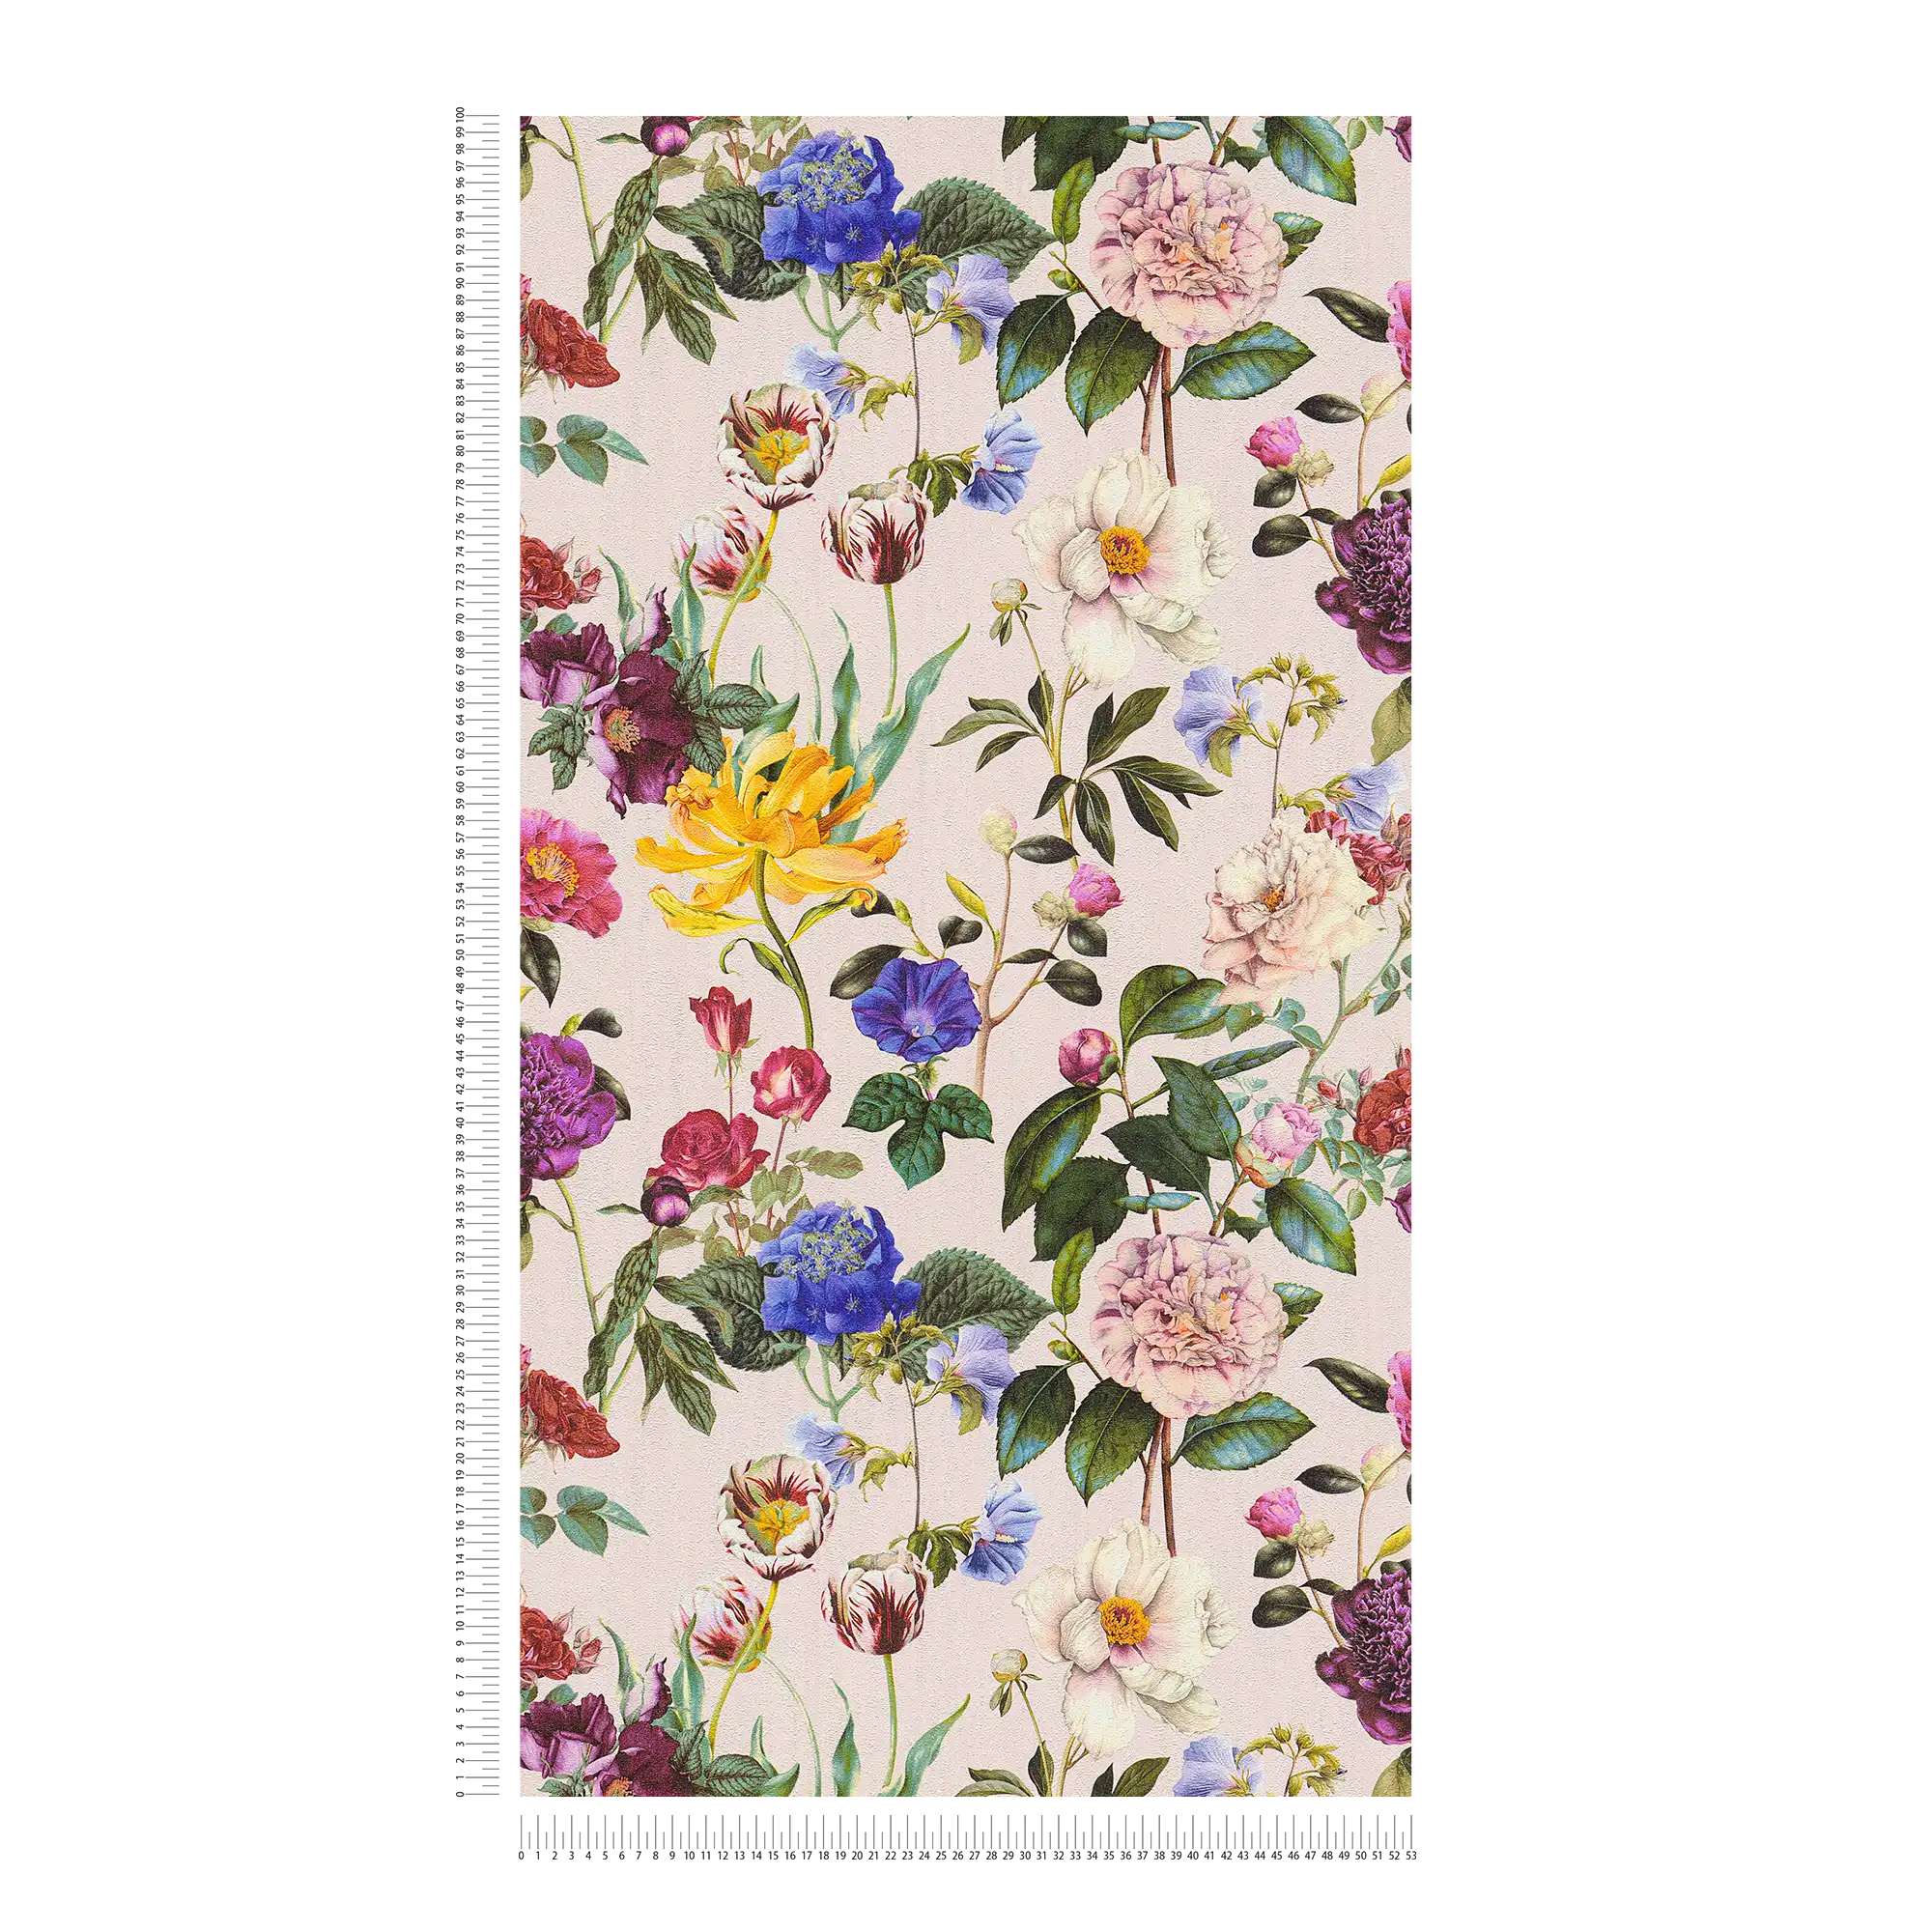             Floral wallpaper with flowers in bright colours - colourful, green, pink
        